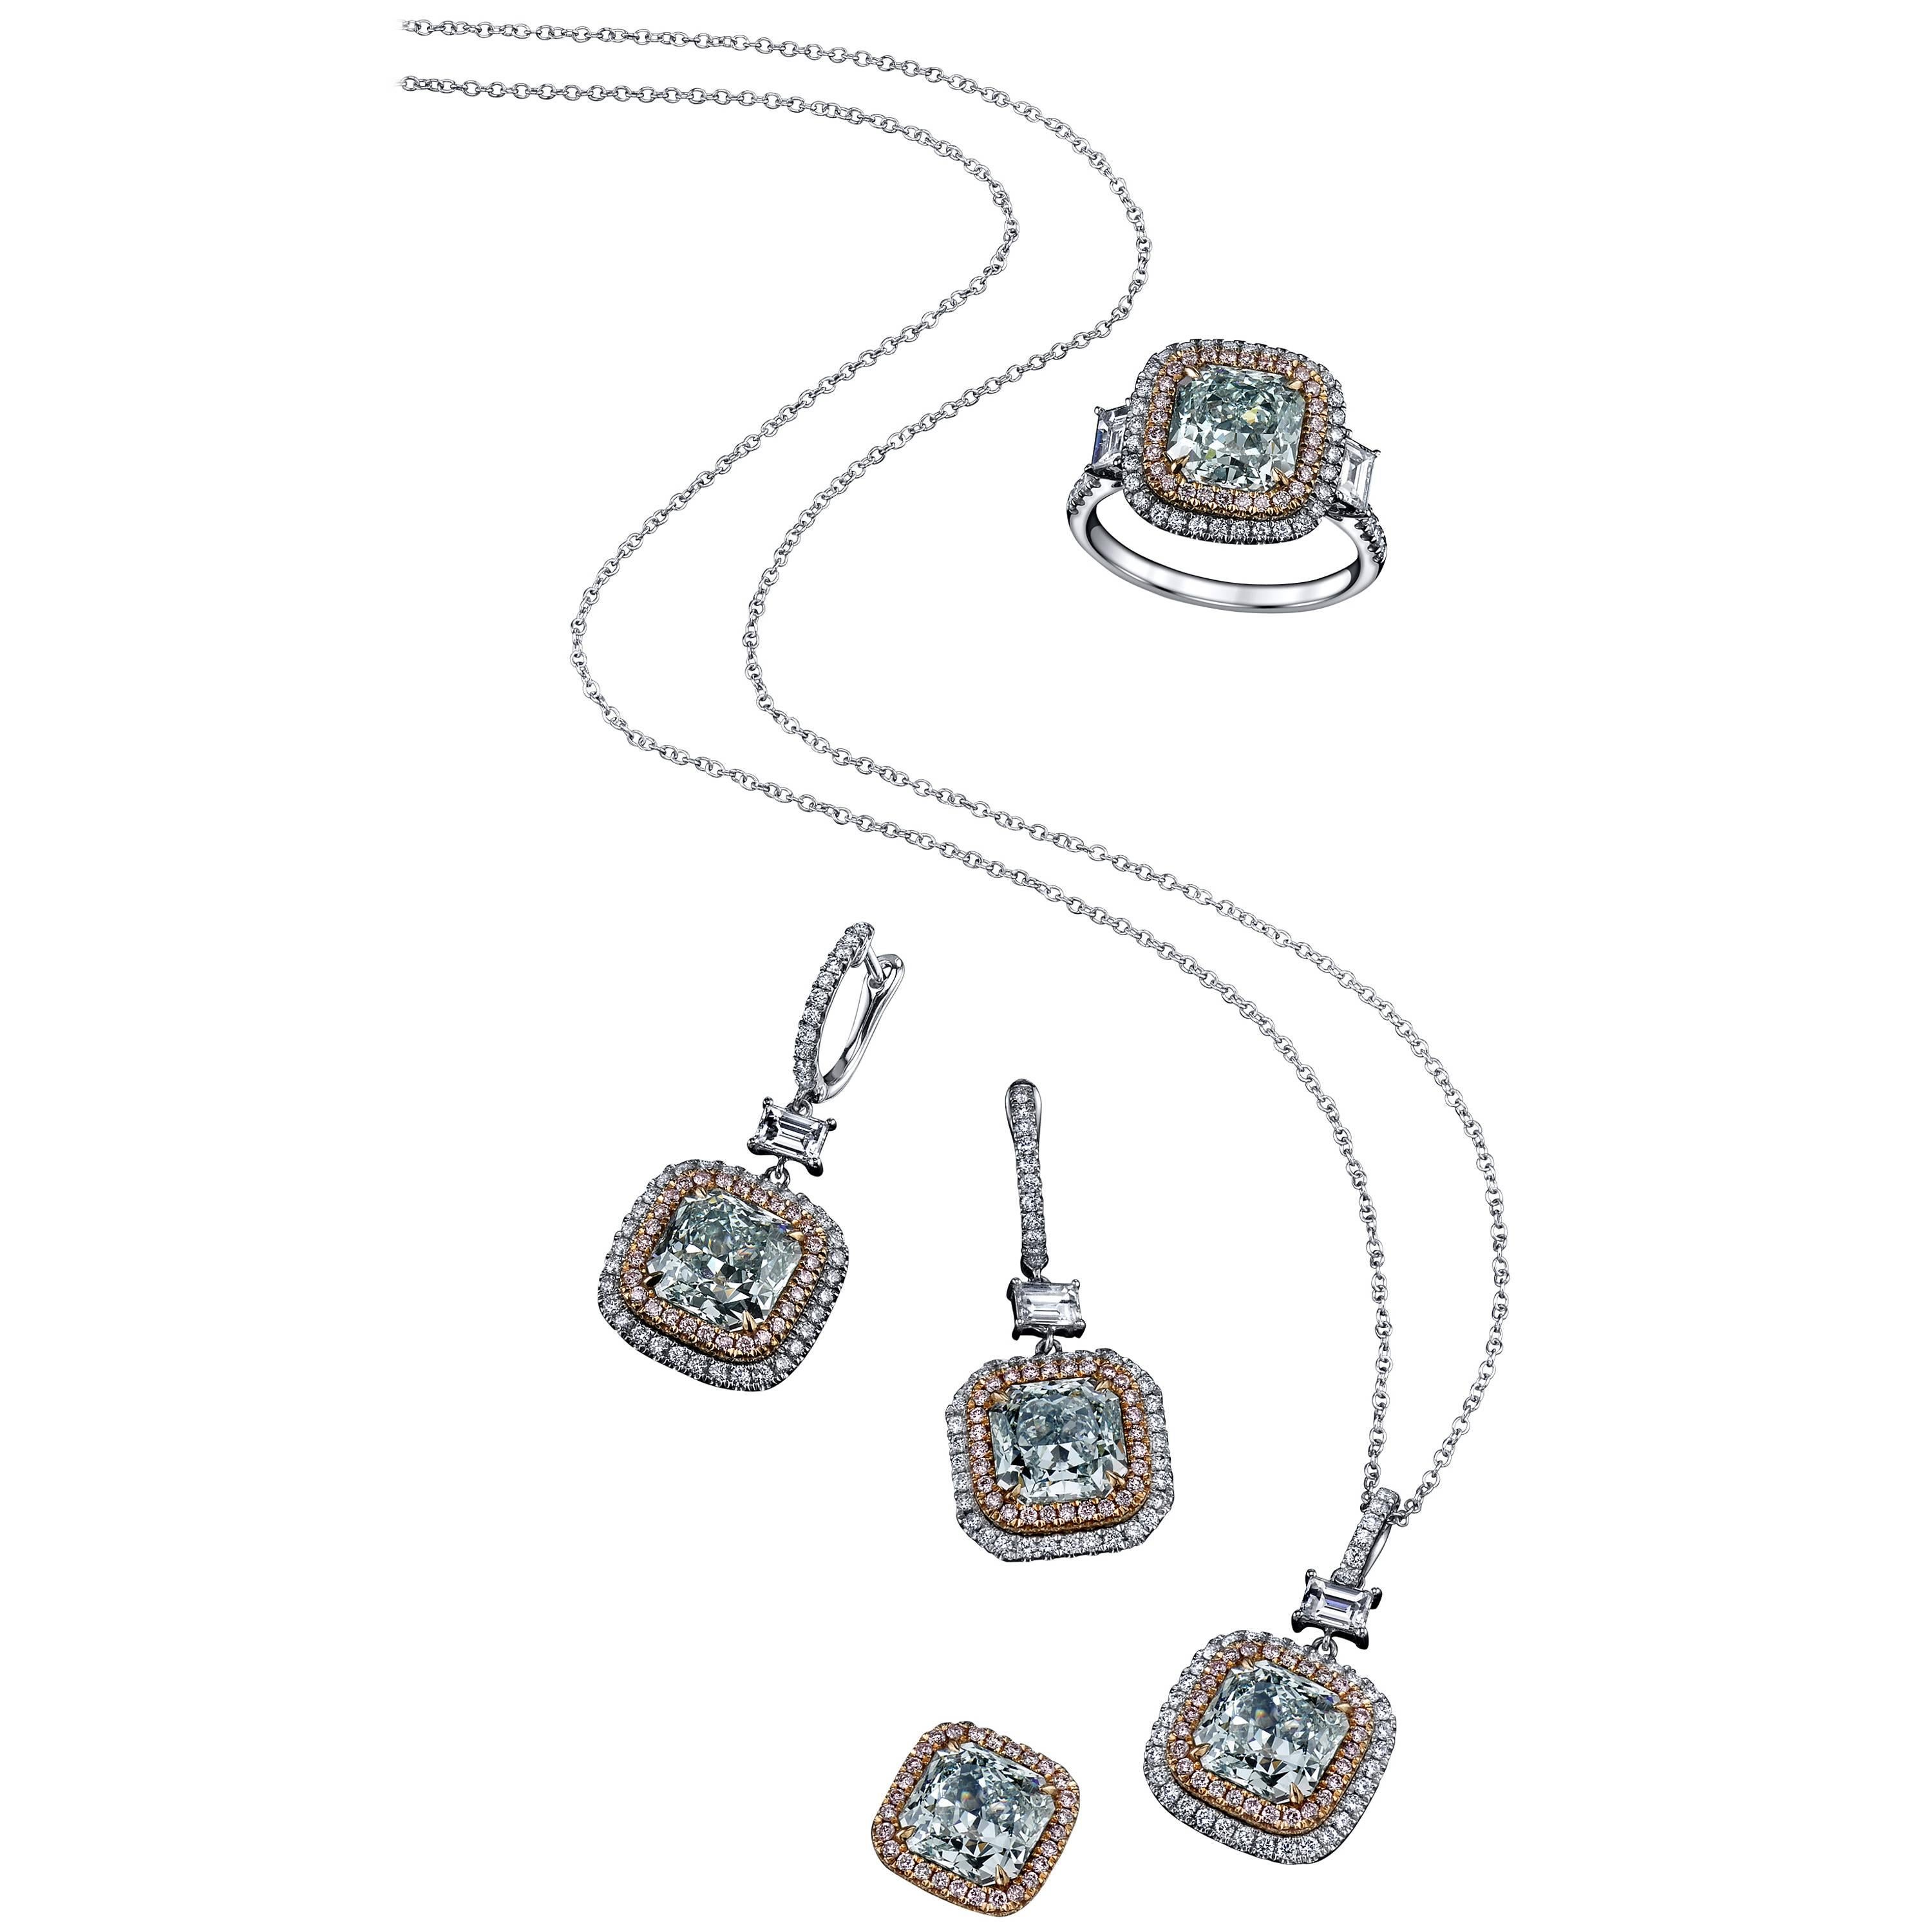 A one-of-a-kind interchangeable natural fancy color diamond set, sold as a pair of earrings, with the ring and pendant mounting included.
The two center stones are surrounded by a natural pink diamond halo, which has a back-clasp which easily